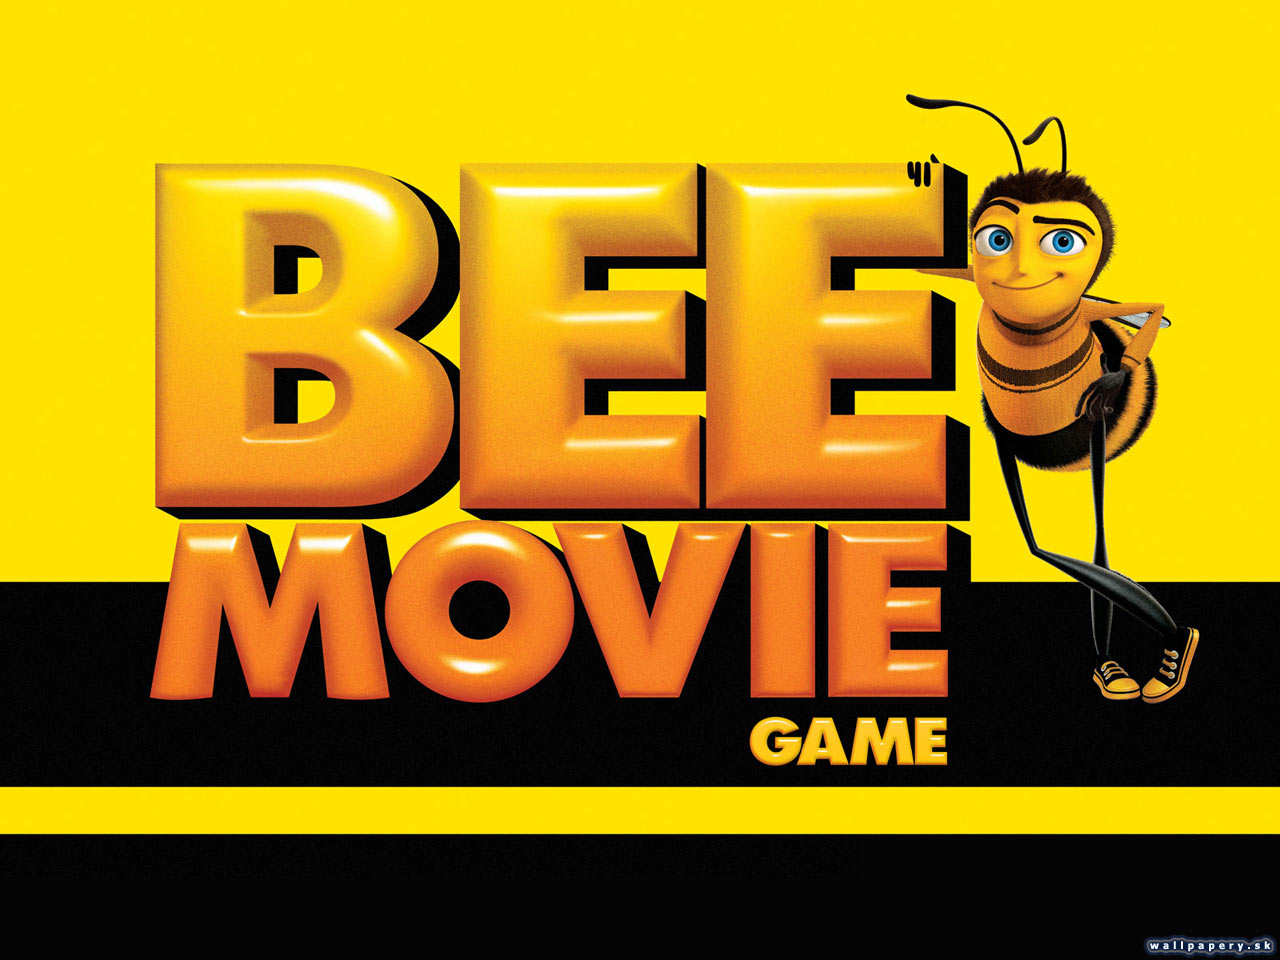 Bee Movie Game - wallpaper 2